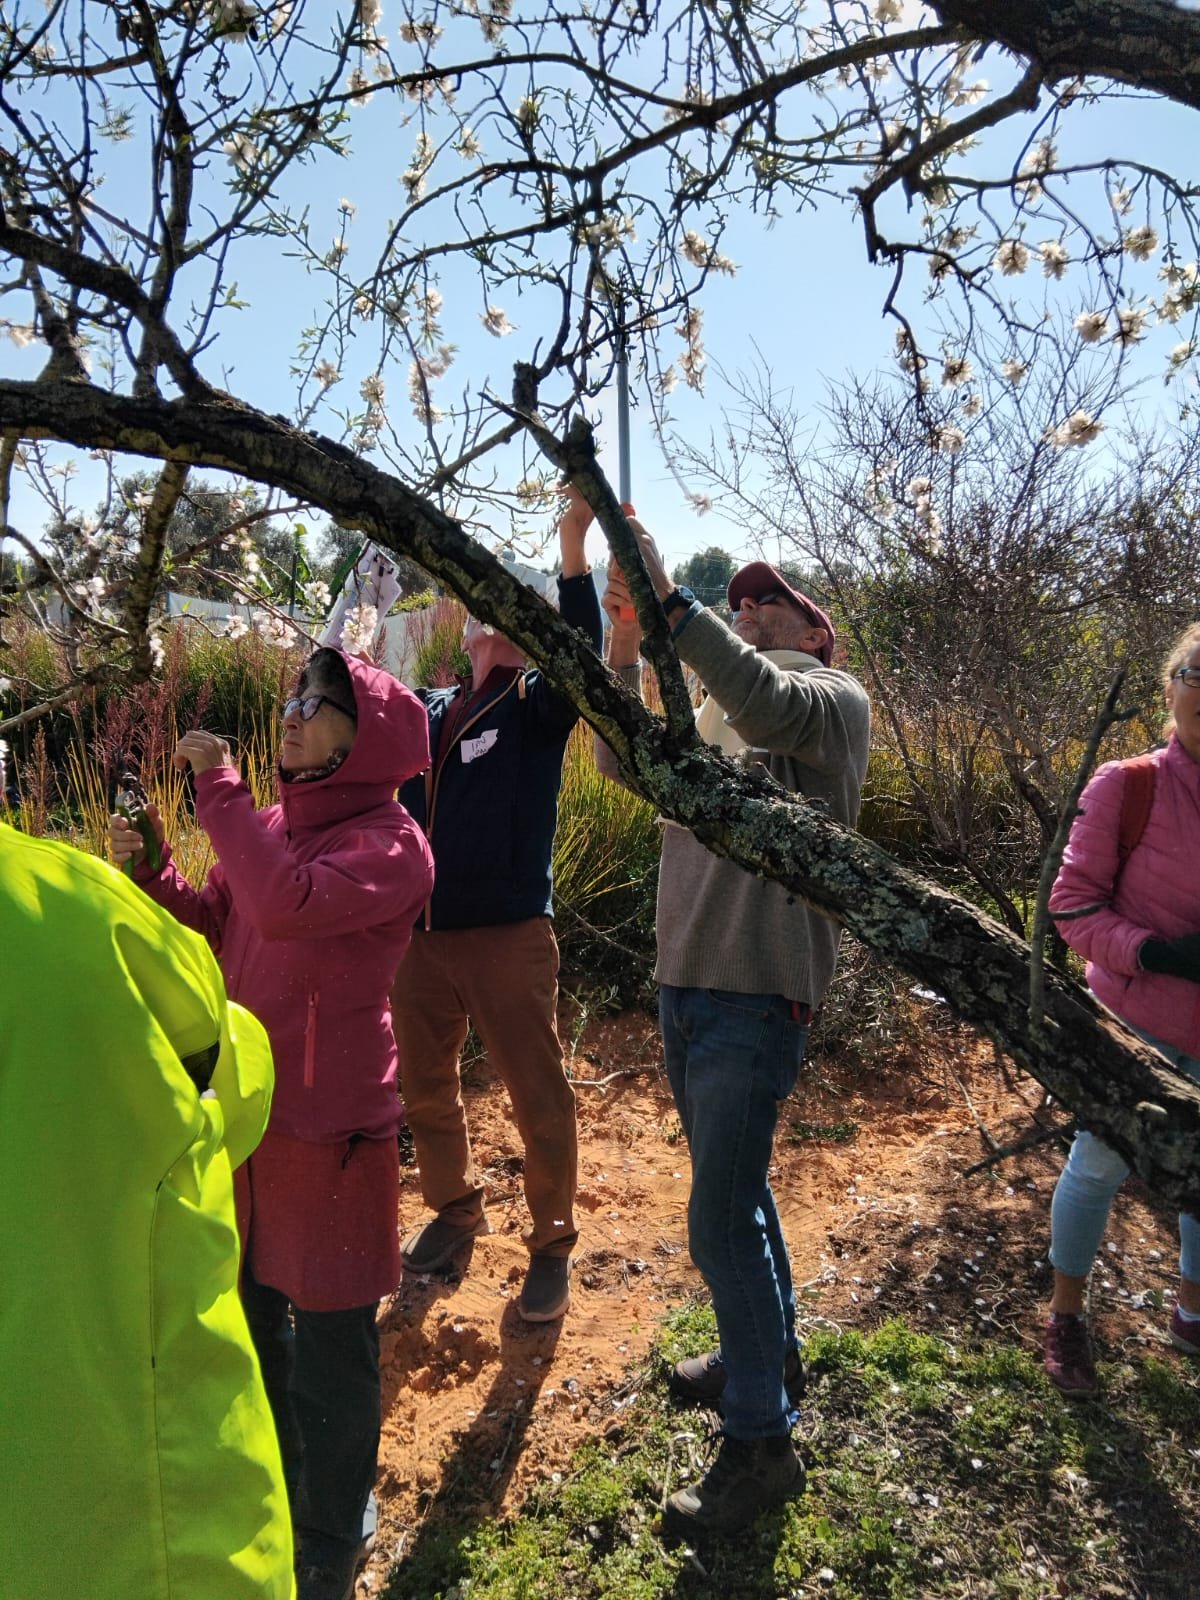 Practical exercise in fruit tree pruning by the students